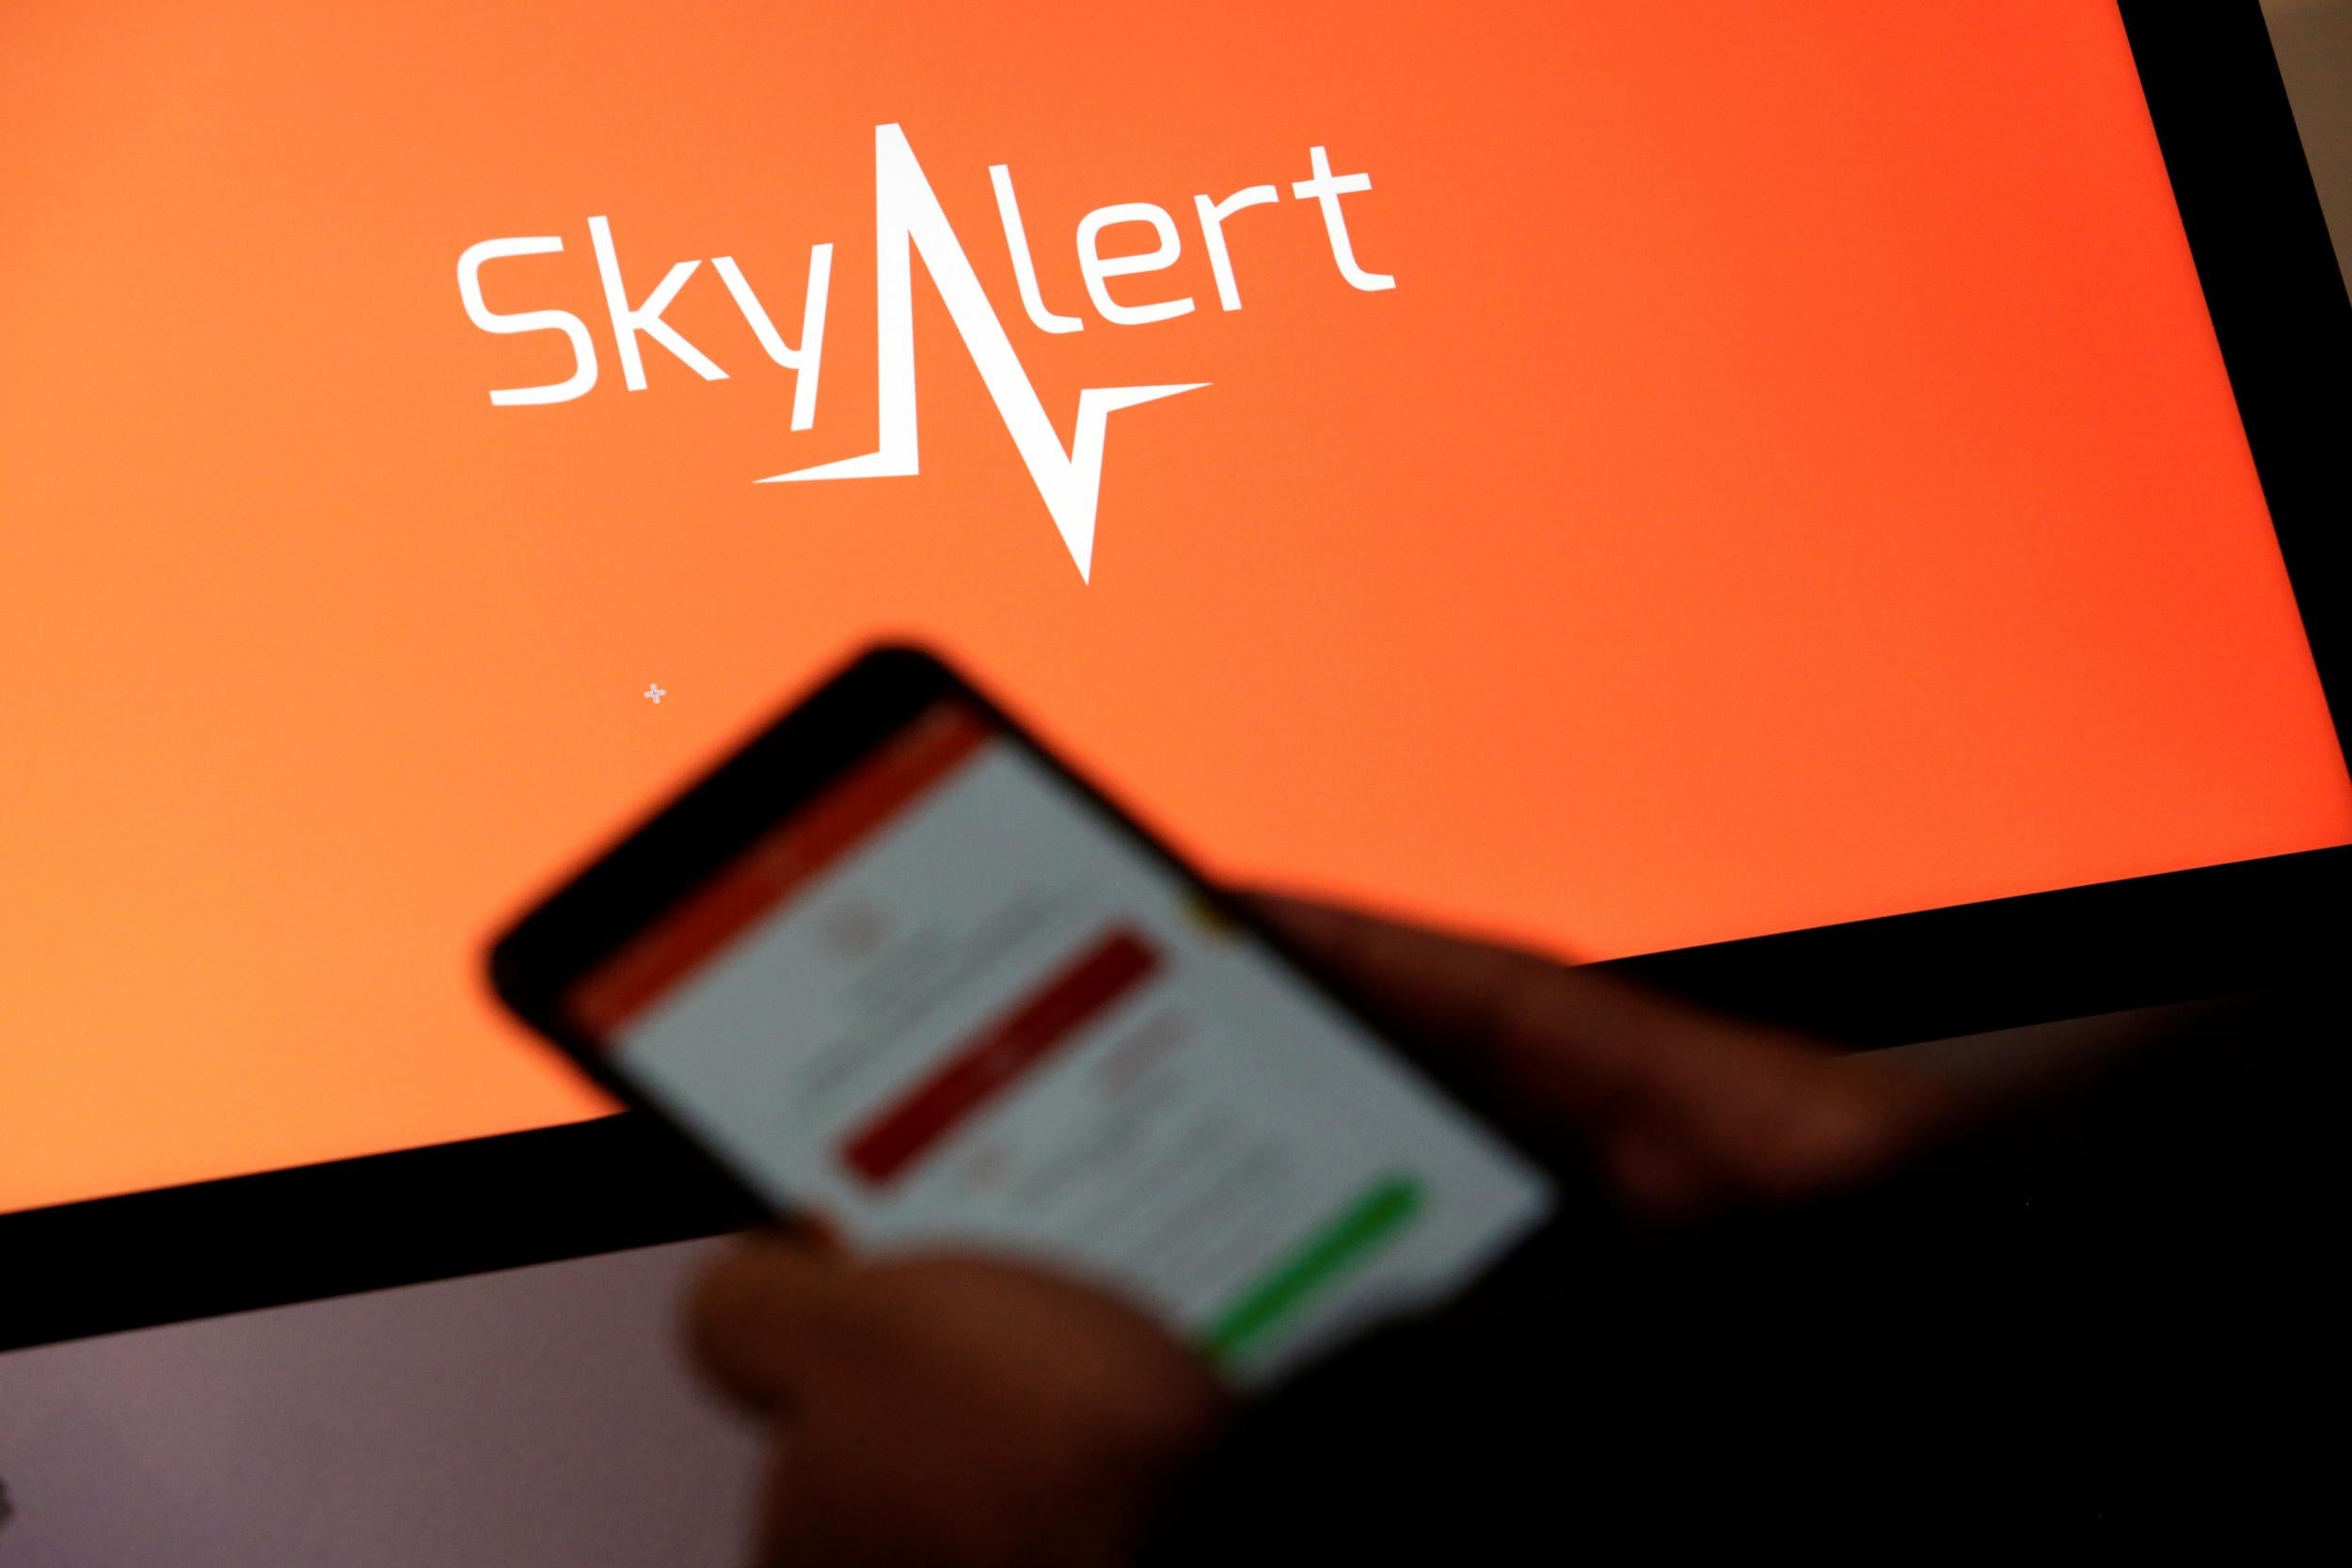 SkyAlert is exploring ways to monetise its free app with advertising – but ads won't be visible during a seismic alert